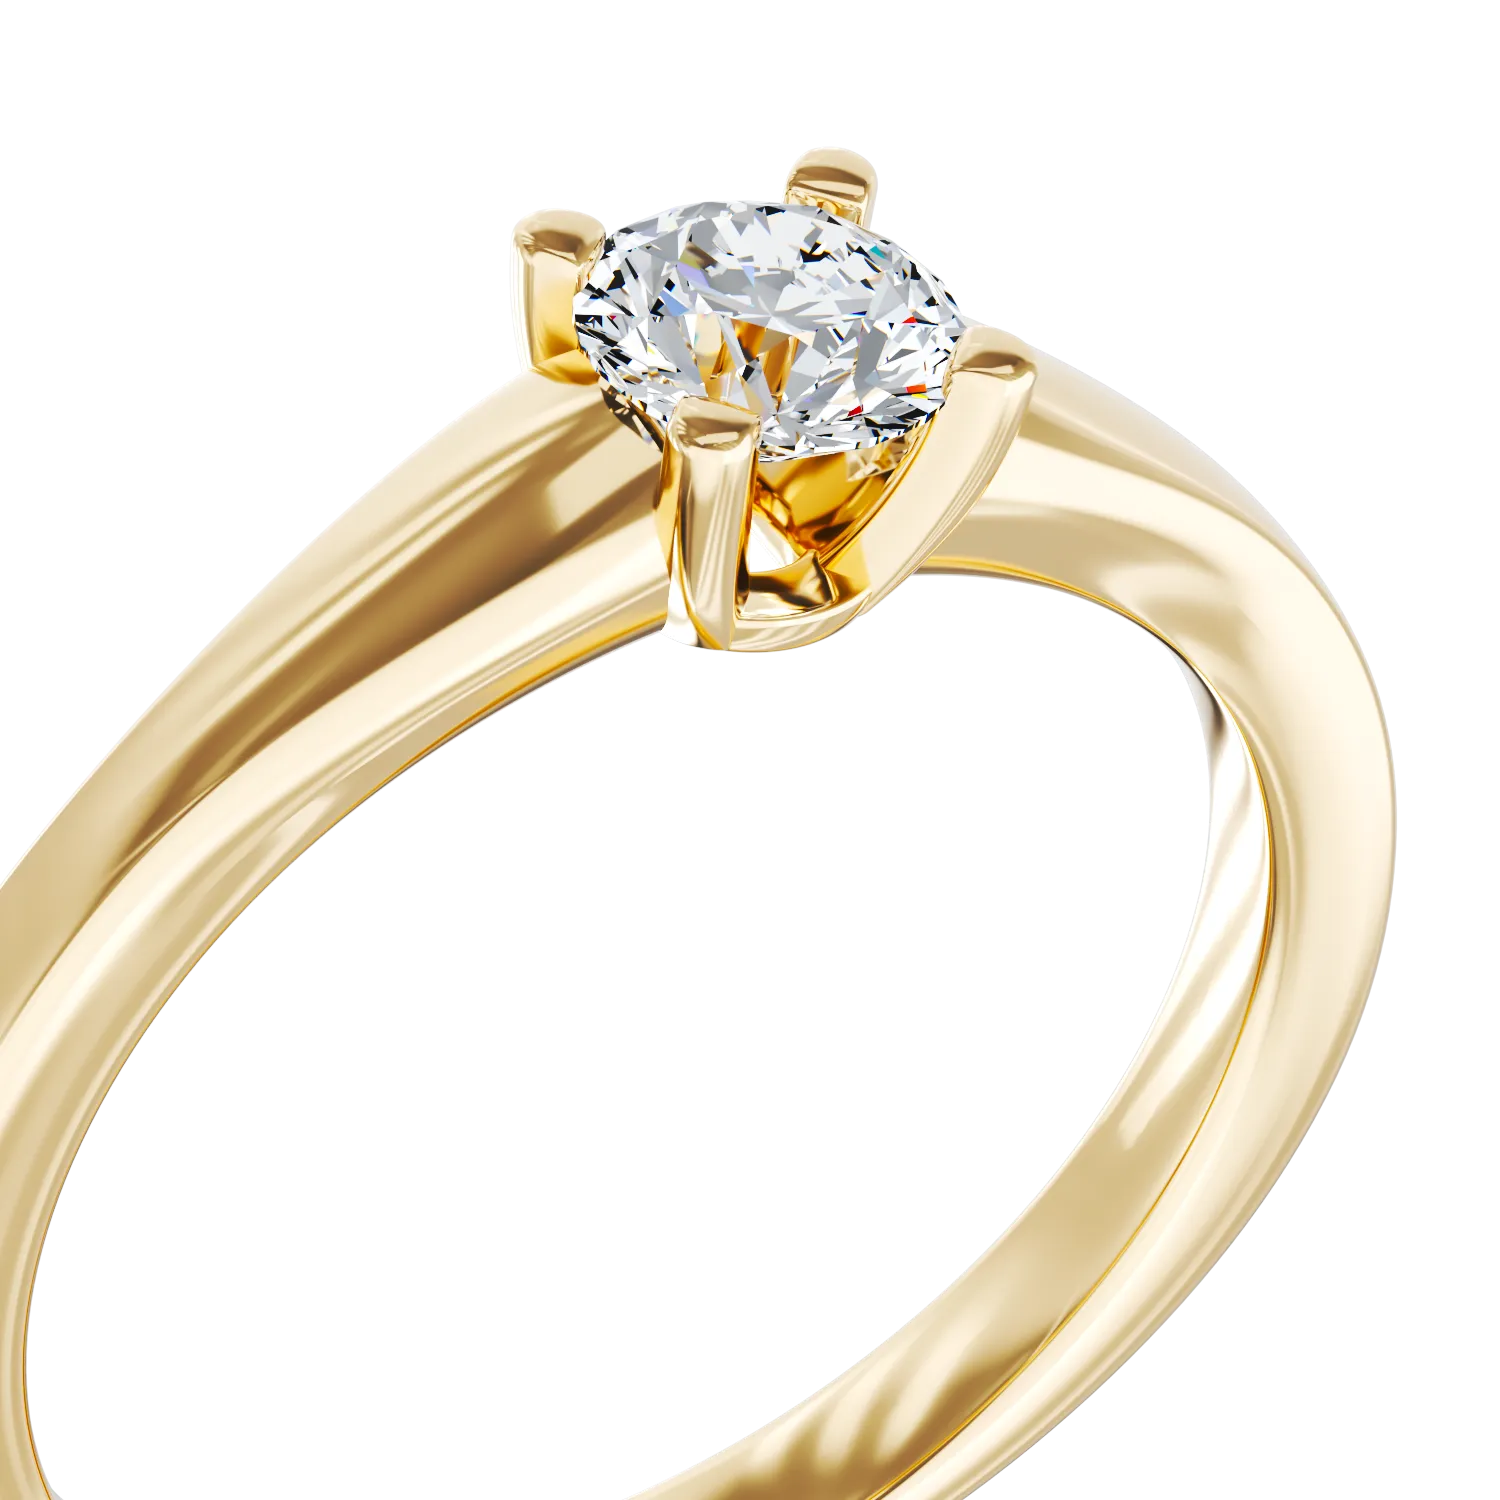 18K yellow gold engagement ring with 0.31ct diamond